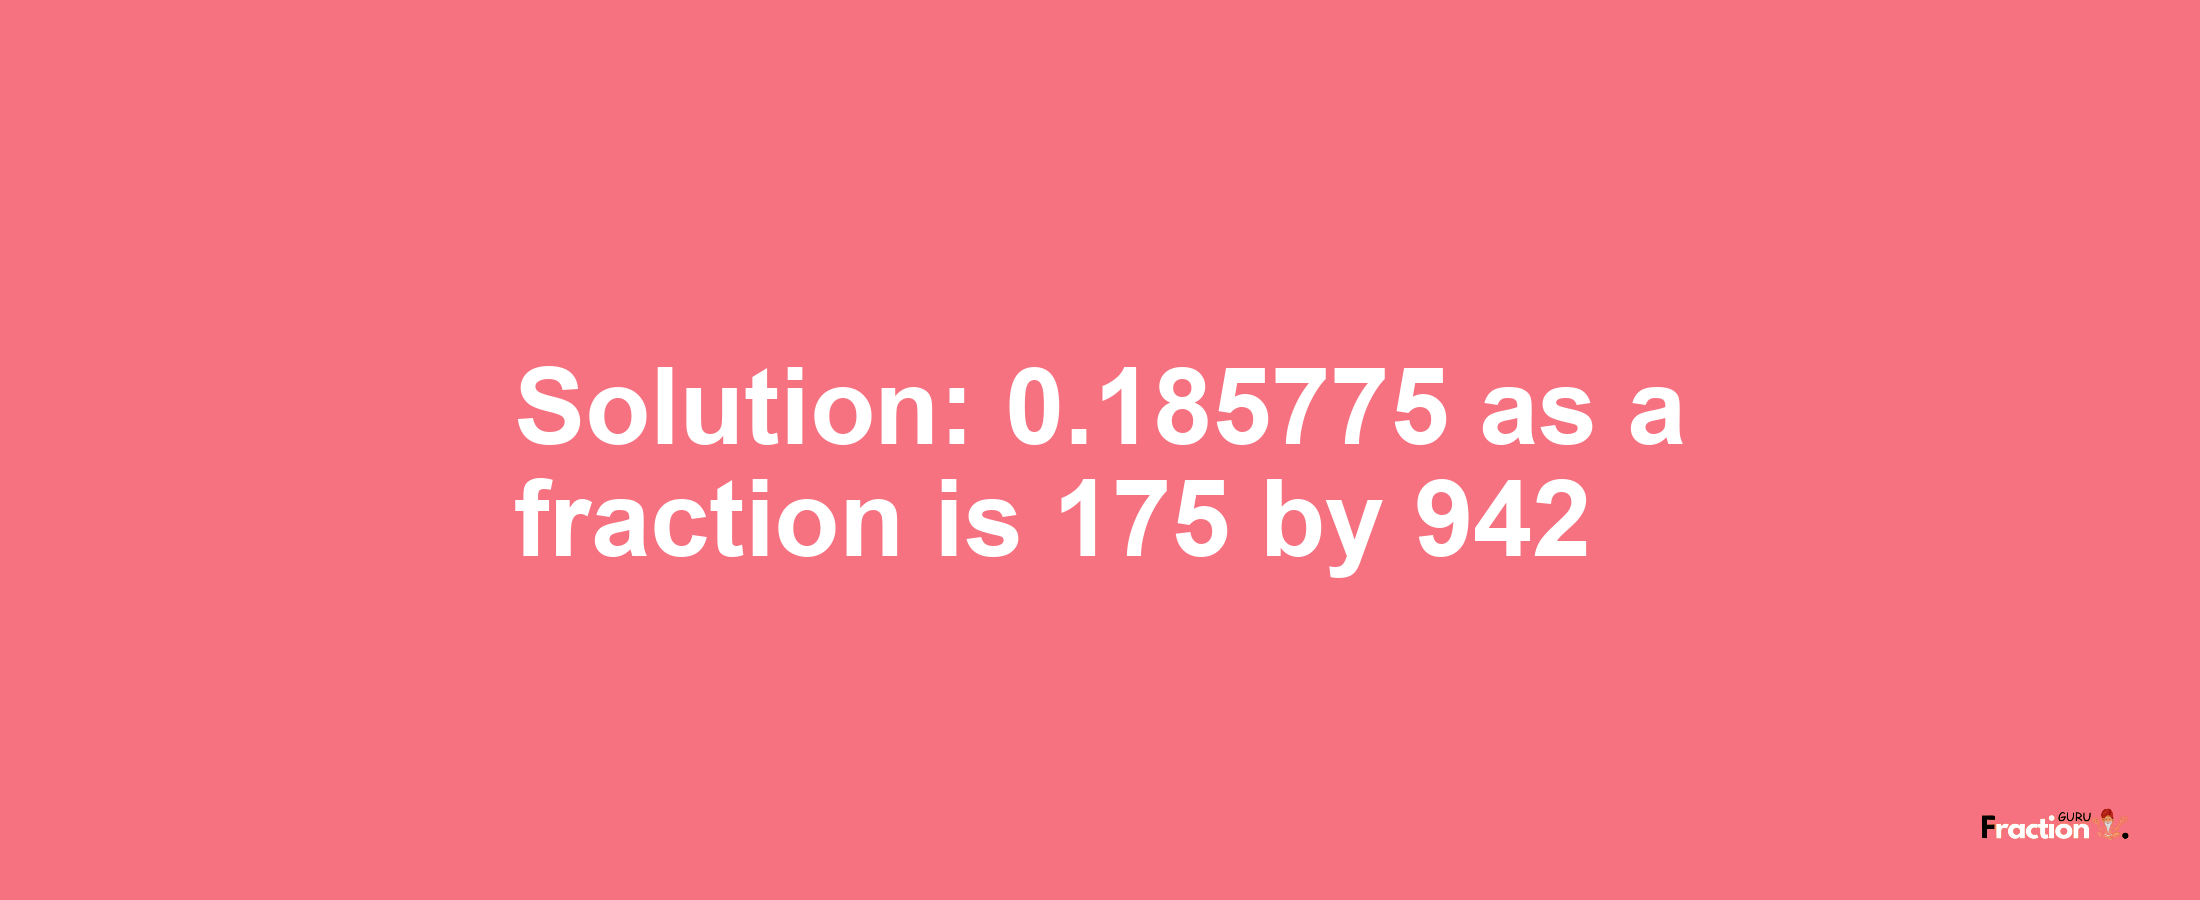 Solution:0.185775 as a fraction is 175/942